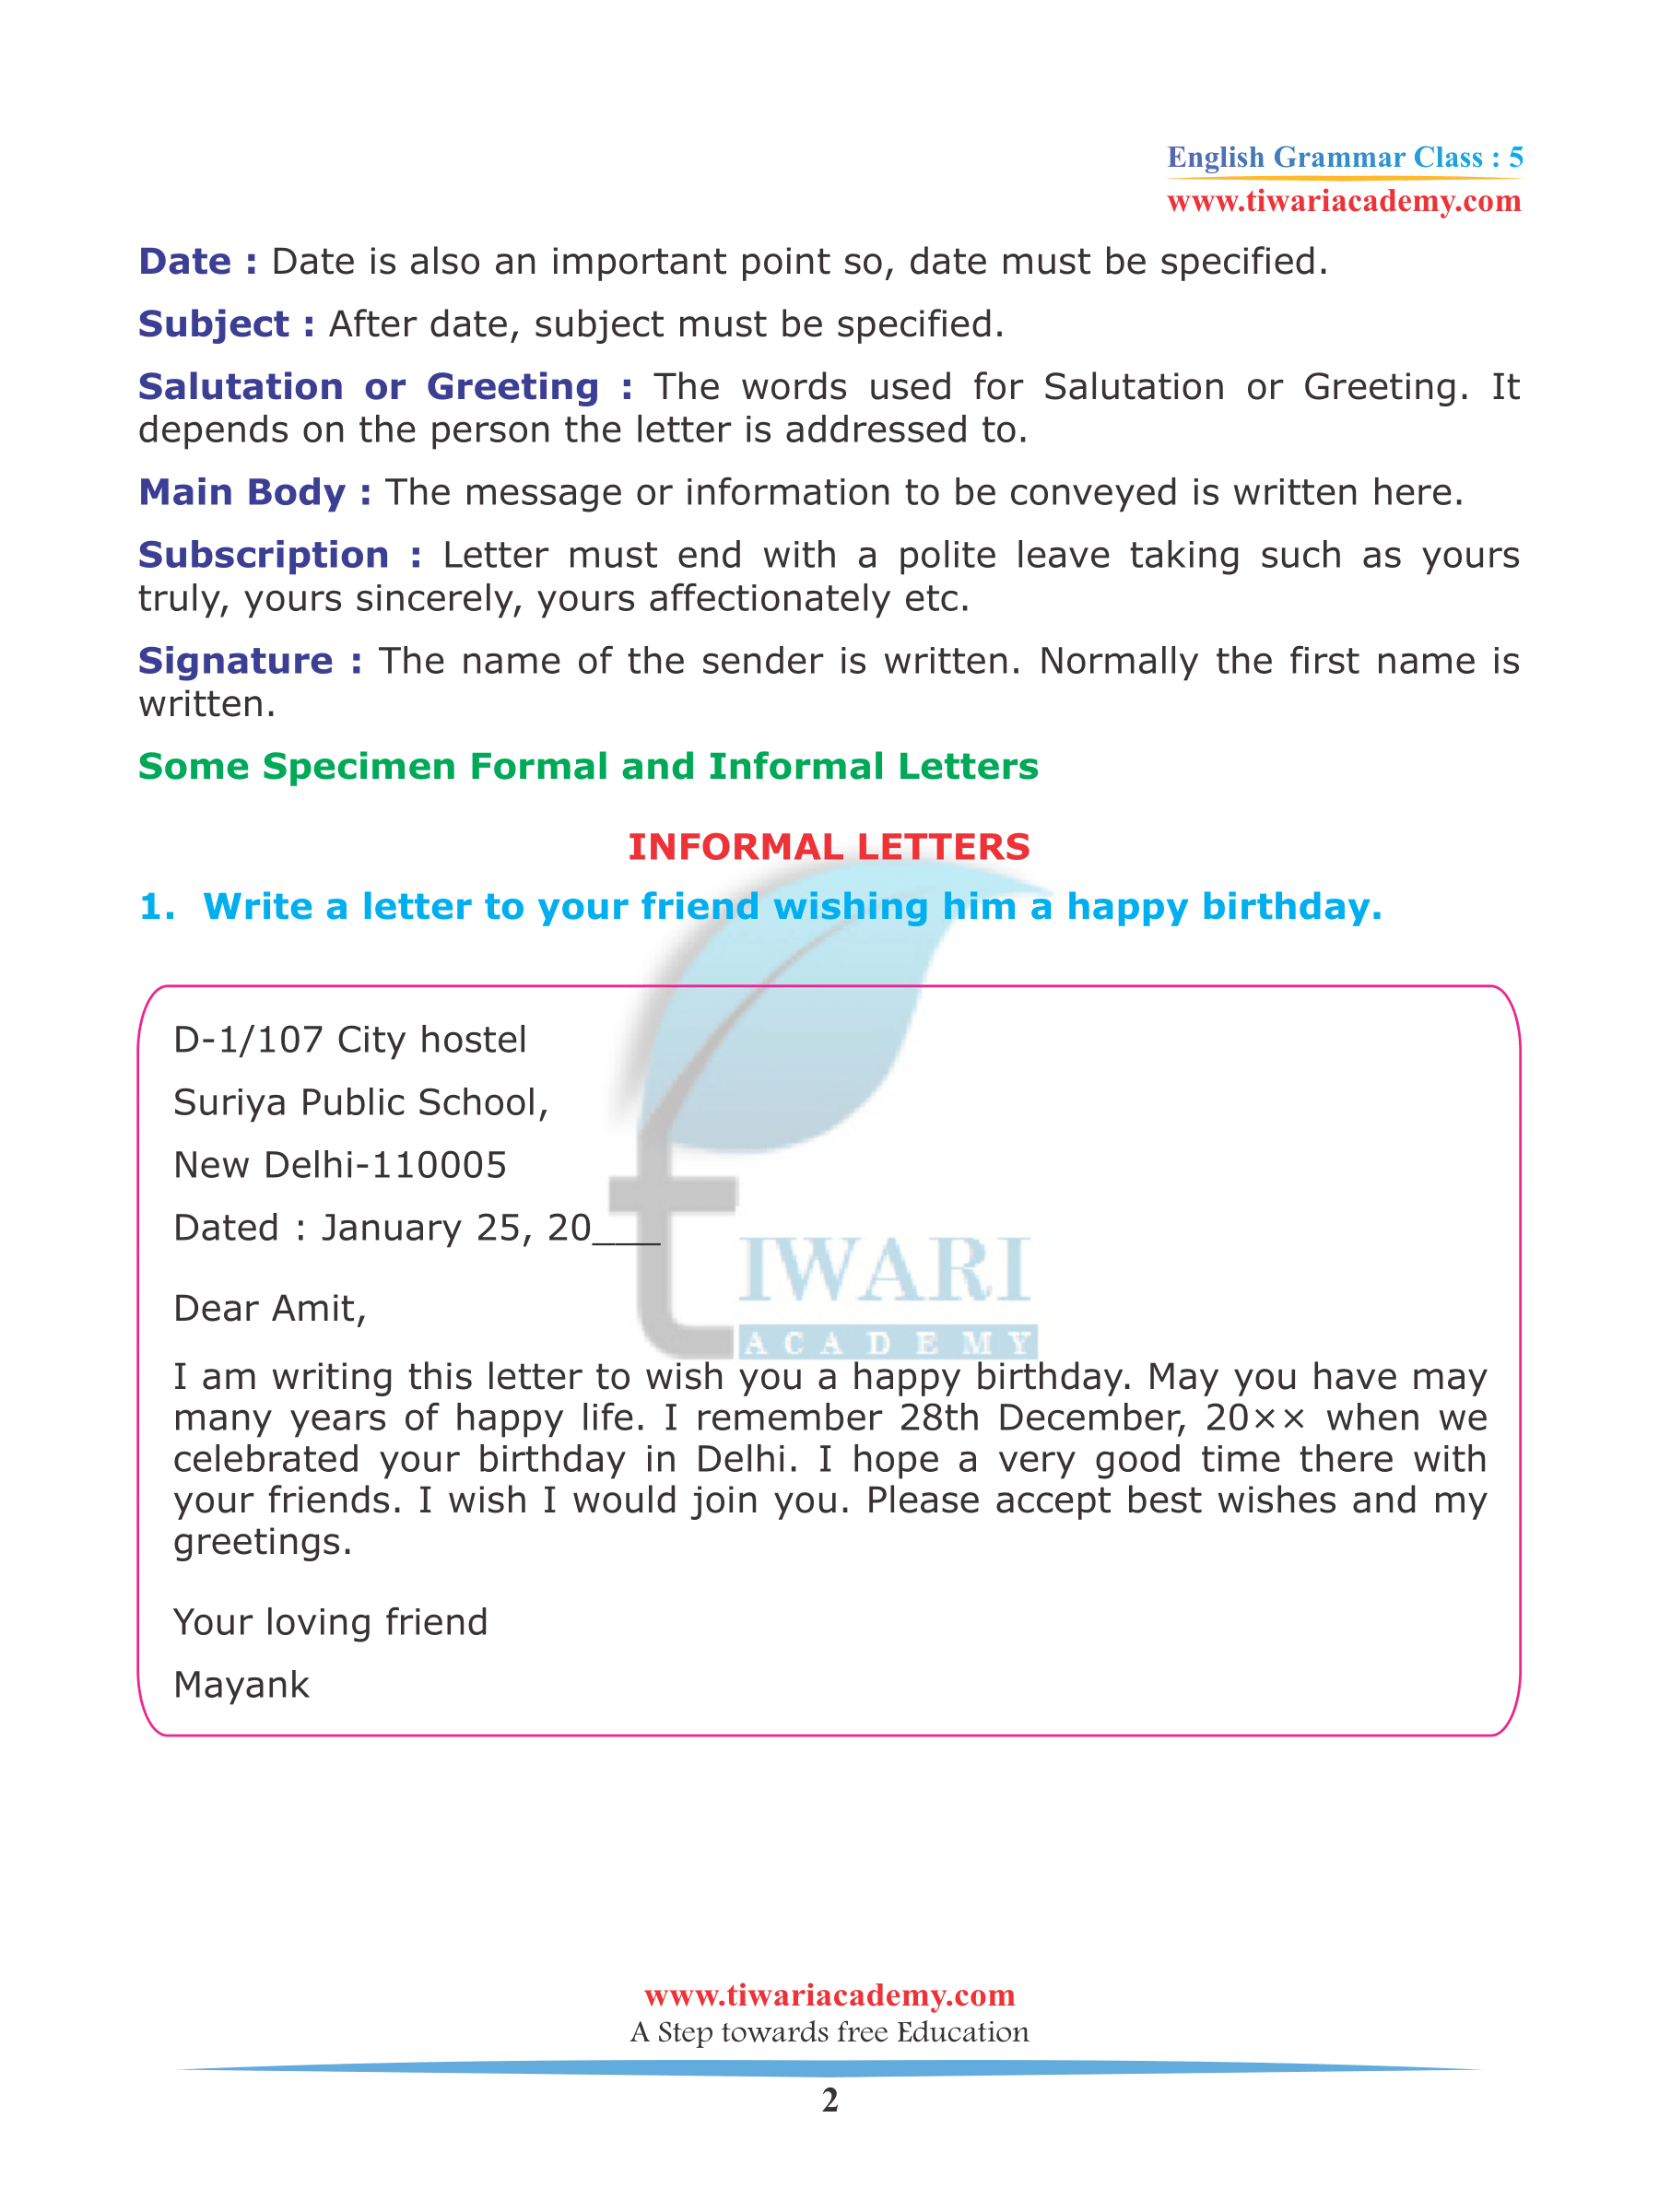 Class 5 English Grammar Chapter 15 Letter and Application writing